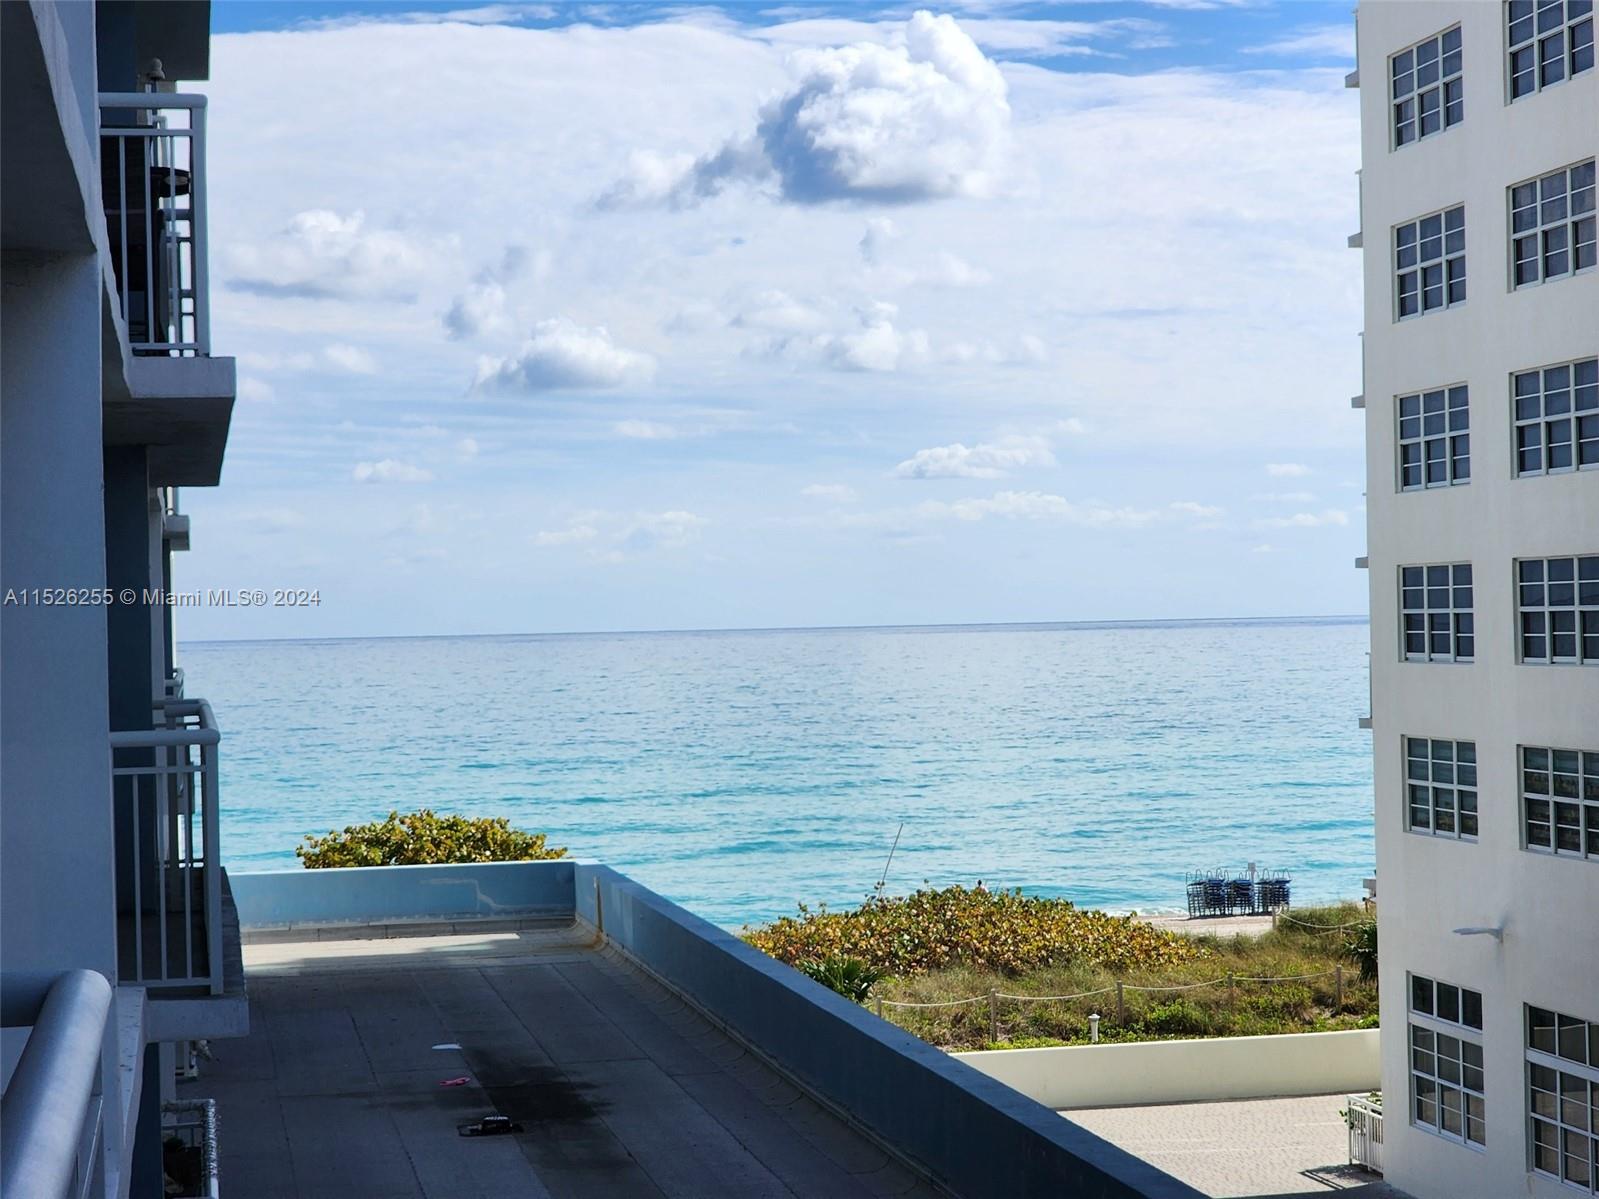 a view of ocean from a balcony